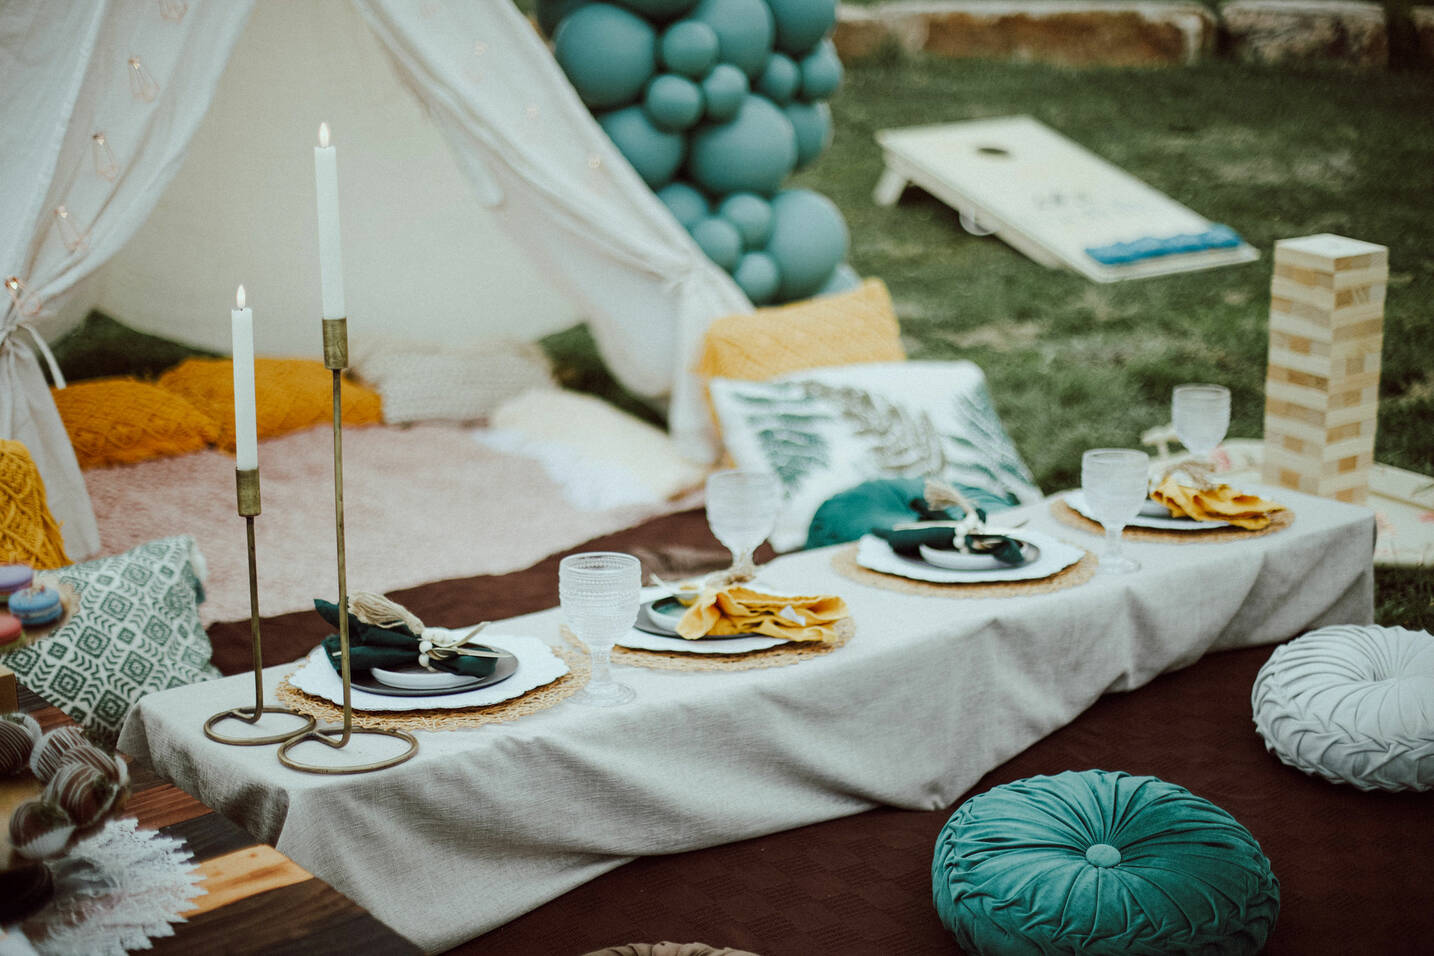 Foothills Picnics offers Fort Collins luxury picnics for dates, birthdays, engagements, anniversaries, and everything in-between. Perfect for couples, friends, and groups.